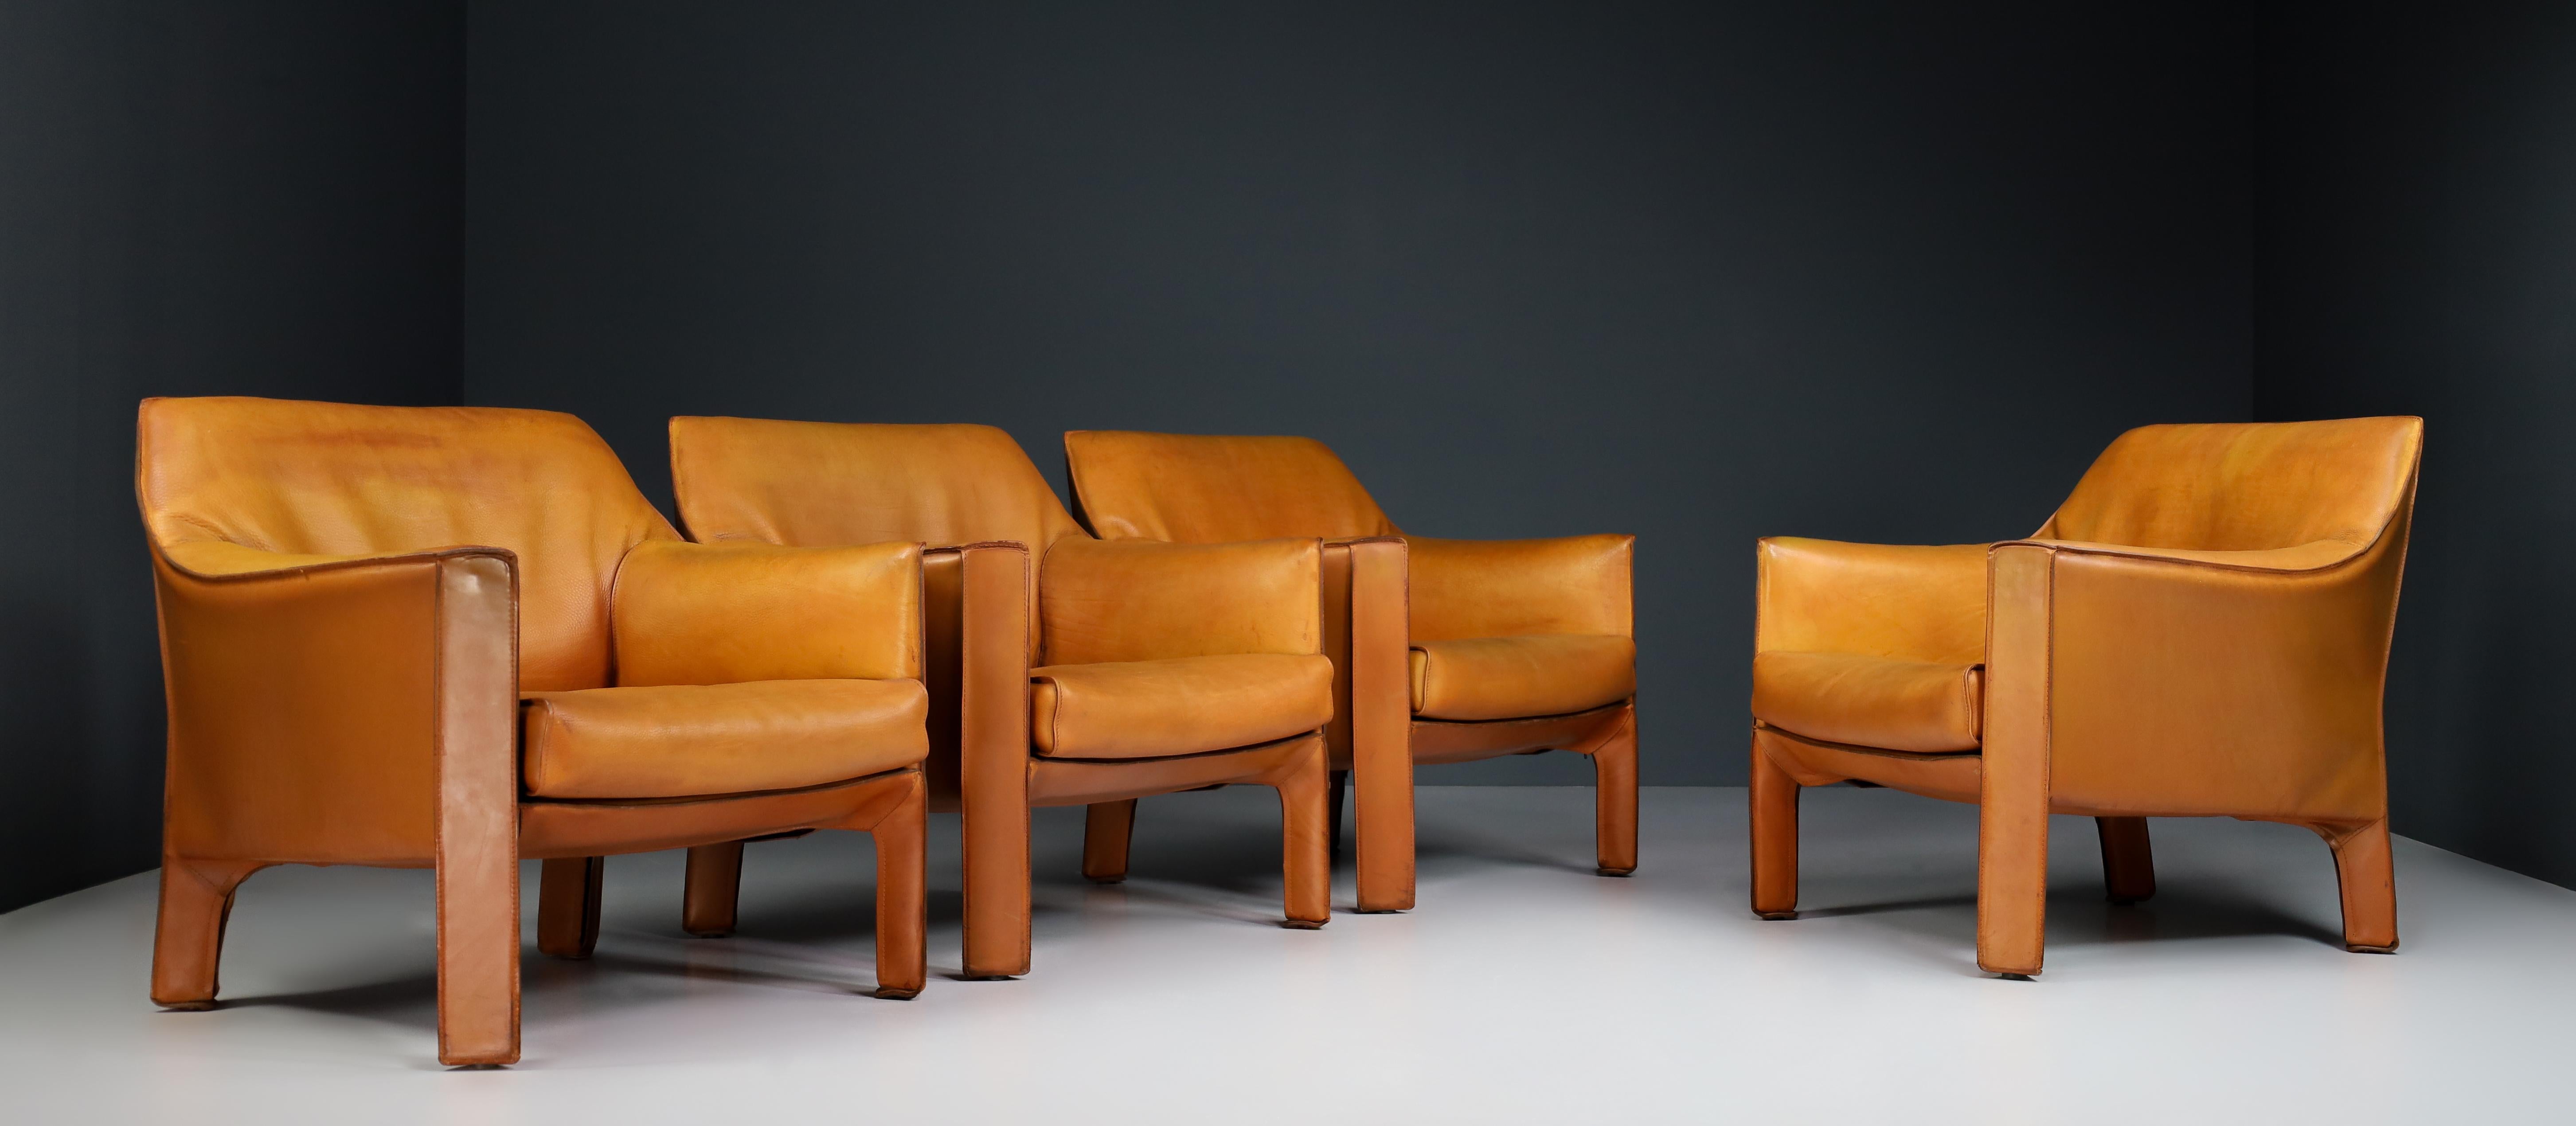 A beautiful set of four (4) rare out-of-production Mario Bellini Model 415 'Cab' Club Chairs in incredible thick Patinated Buffalo Cognac leather, by Cassina (signed), designed in the 1970s, these early production examples produced in circa 1980s.